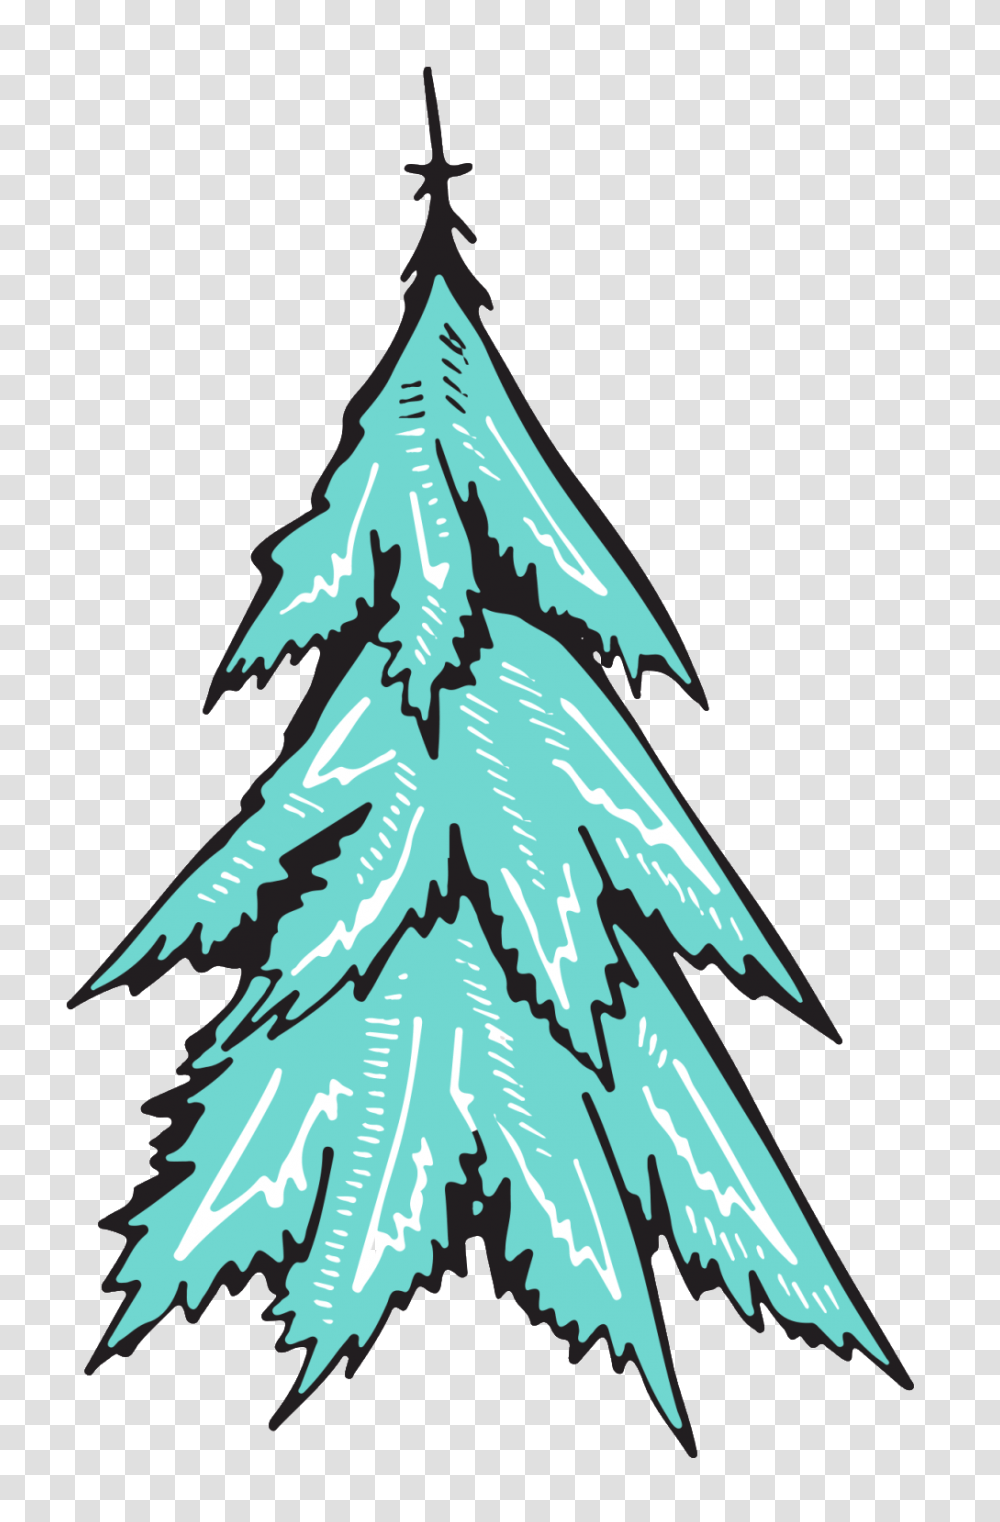 Hand Painted Watercolor Christmas Tree Spruce Tree Images, Plant, Ornament Transparent Png